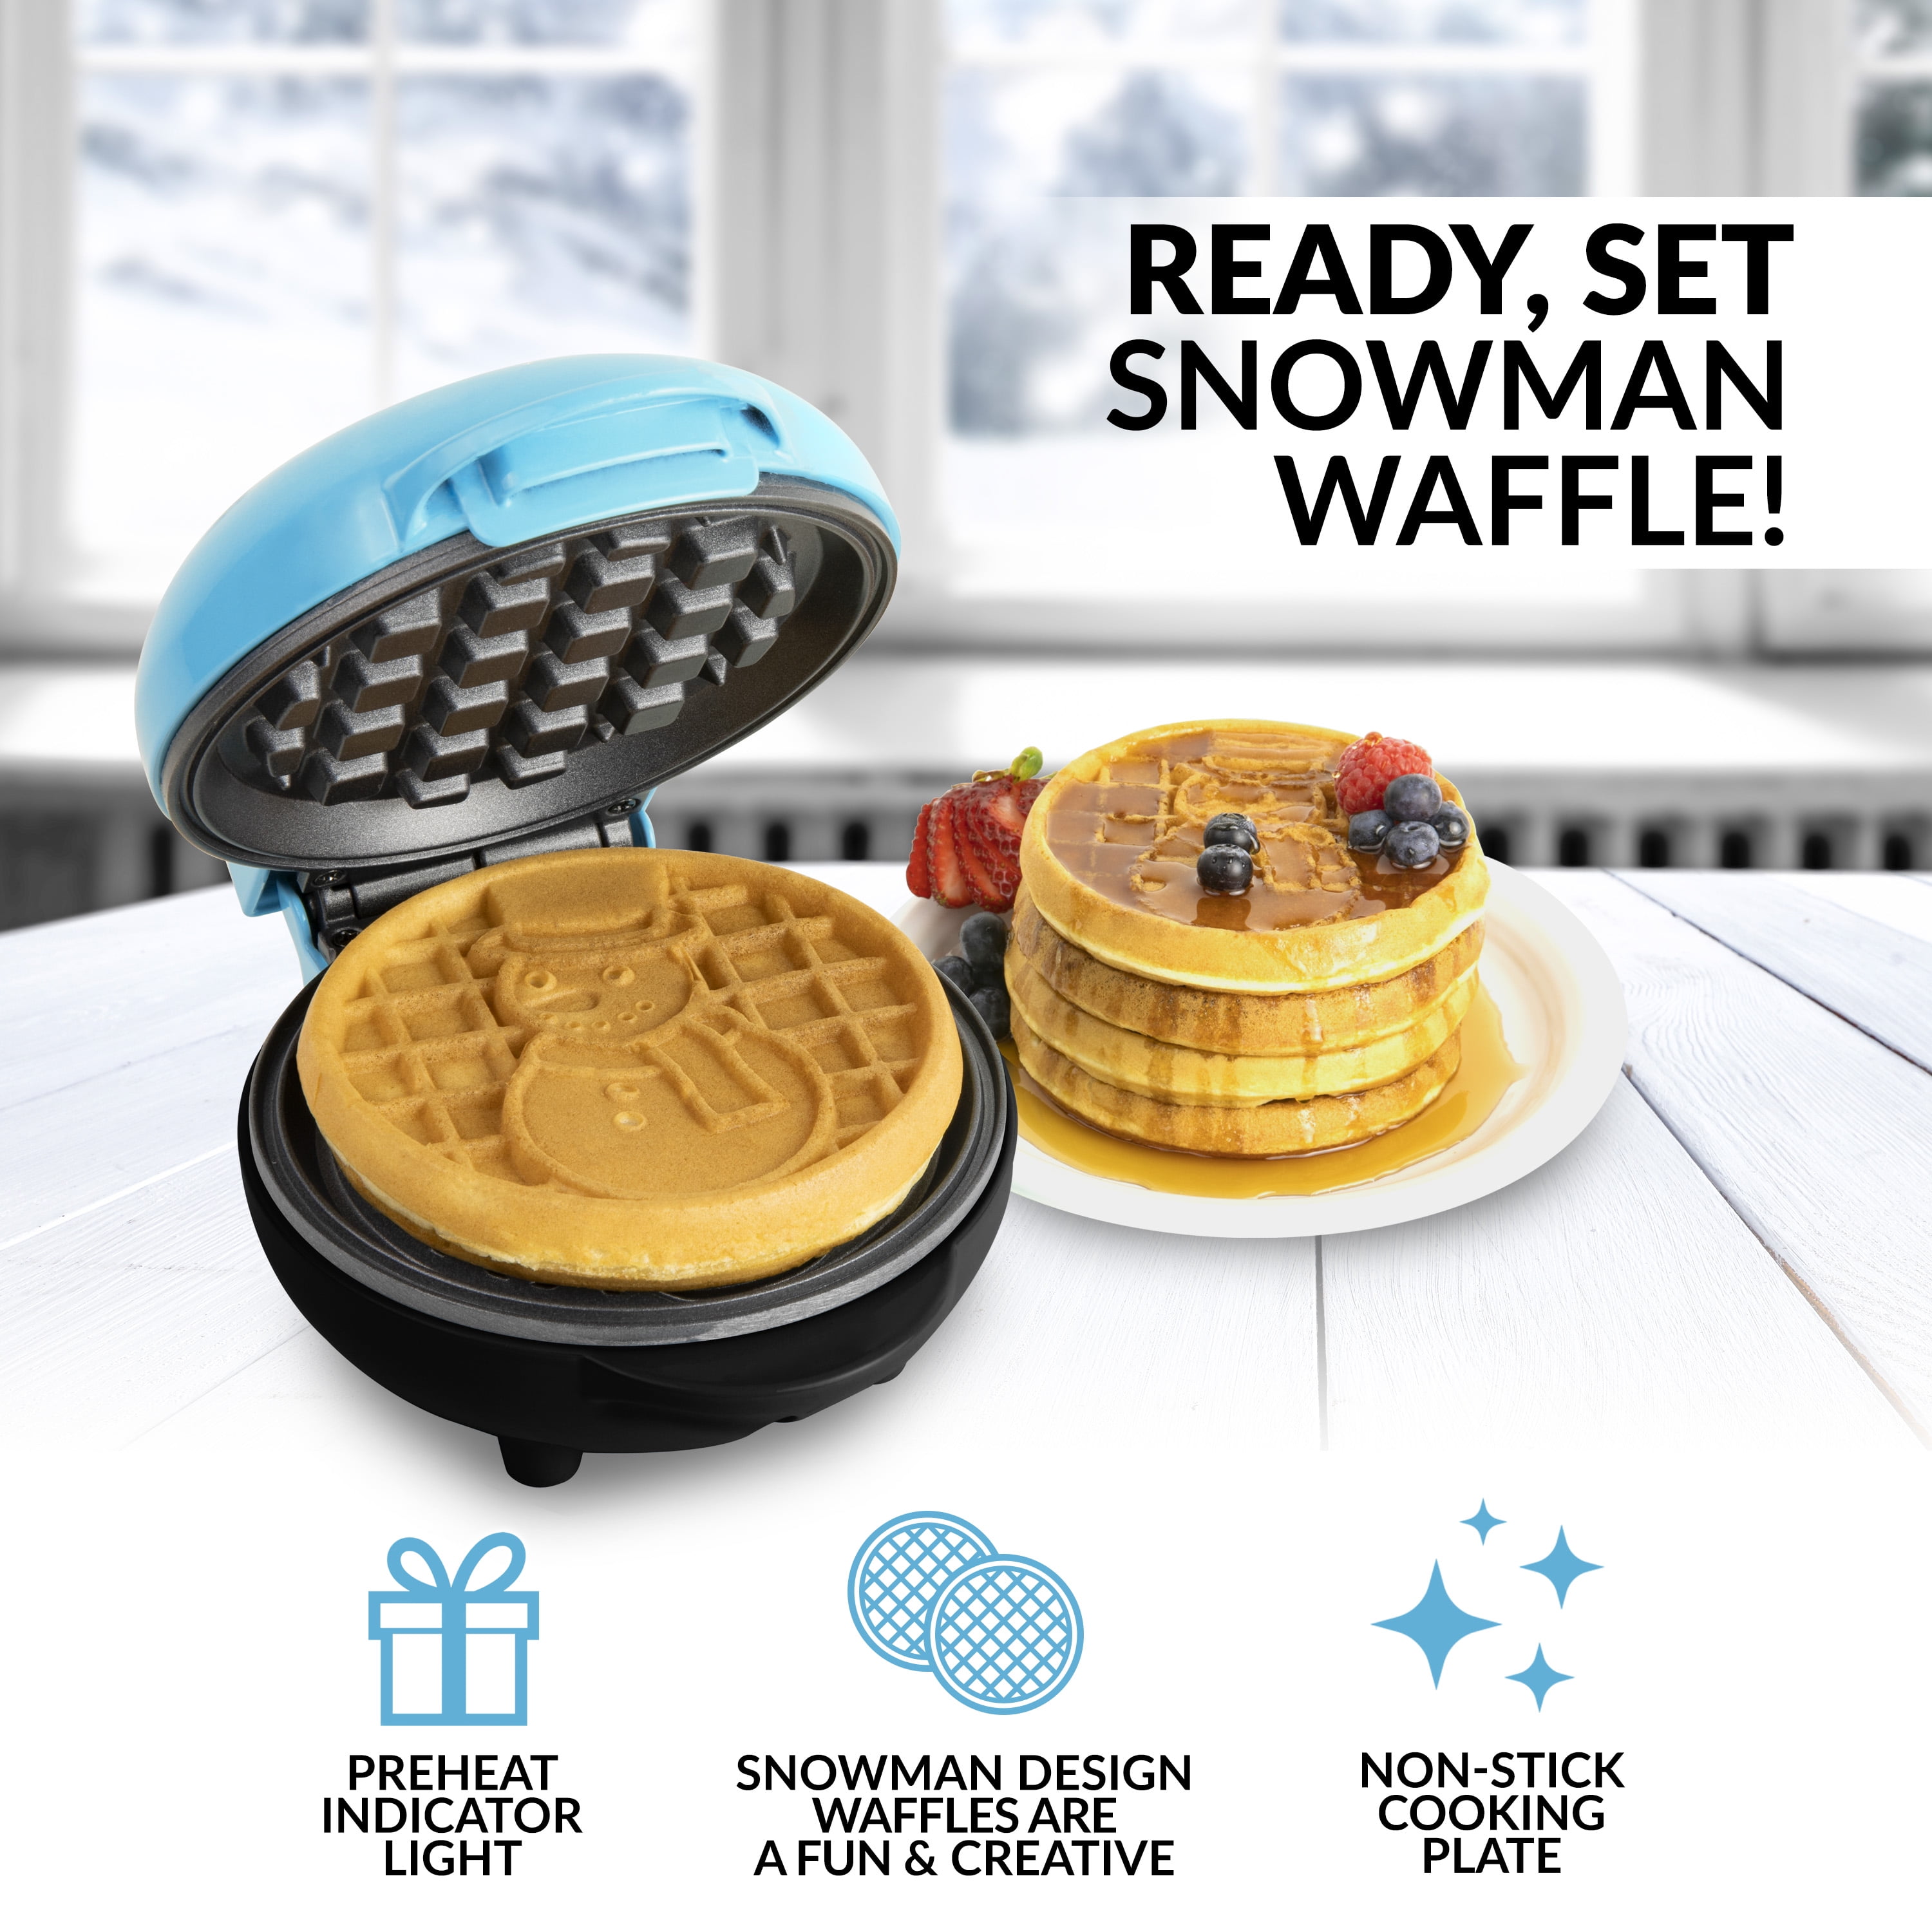  UVFAST Mini Waffle Maker Snow Shaped, Small Waffle Irons  Non-stick, Breakfast Belgian Waffles, Mini Waffle Irons Makes Waffles in  Minutes, Portable Pancakes Maker Machine for Kid, 5 Inches Wide, Black: Home